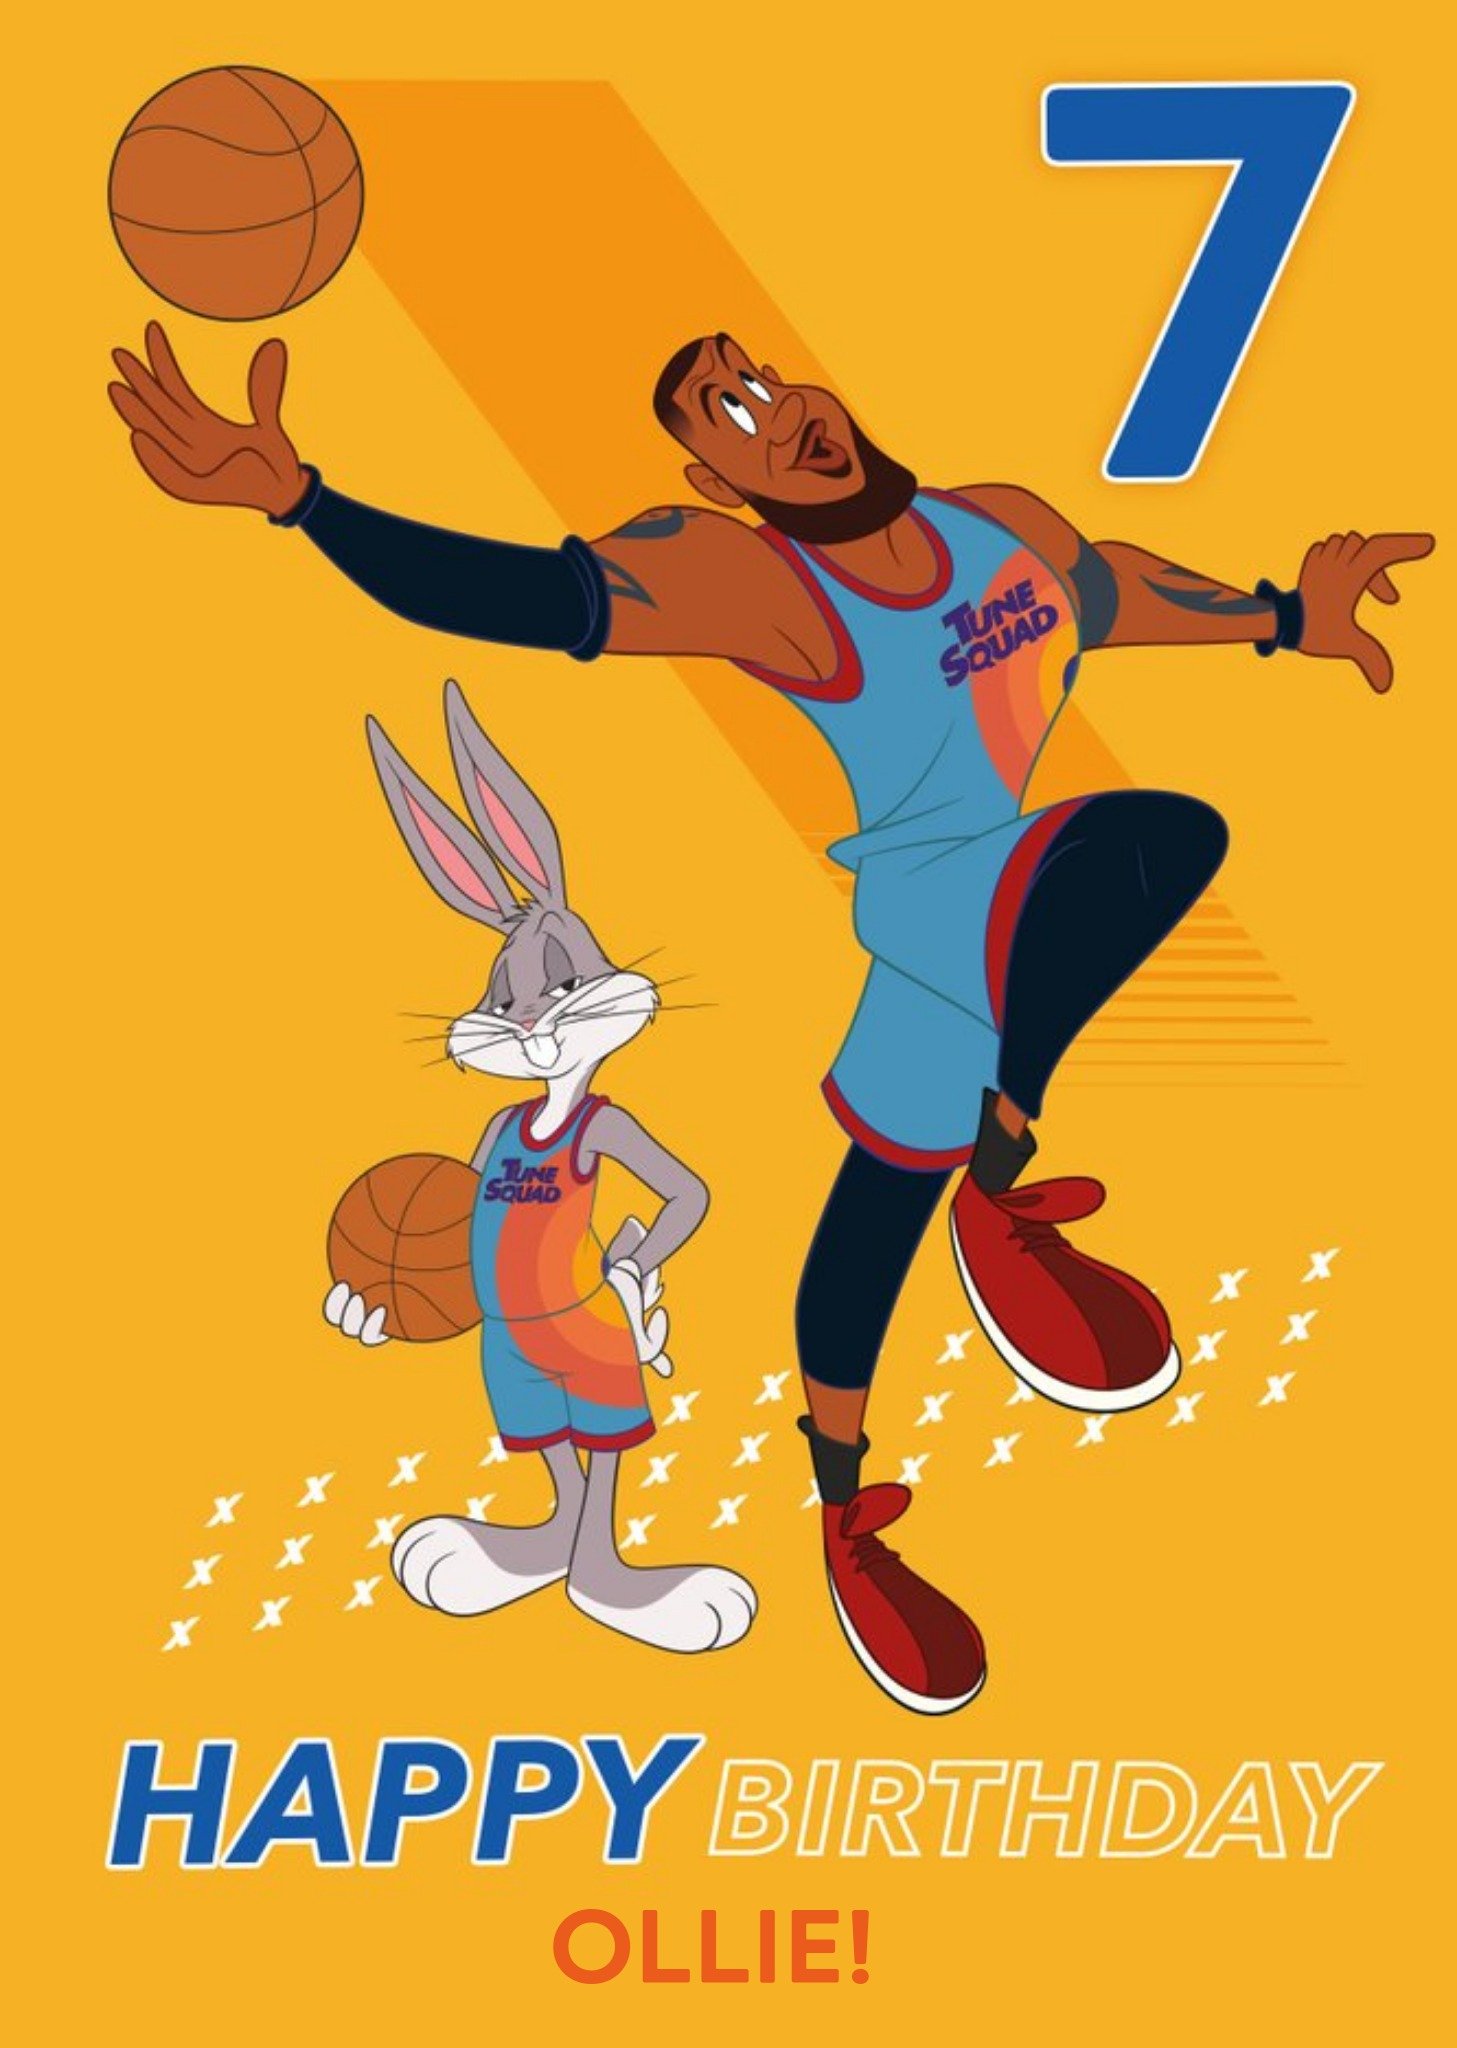 Moonpig Space Jam 2 Lebron James And Bugs Bunny 7th Birthday Card, Large